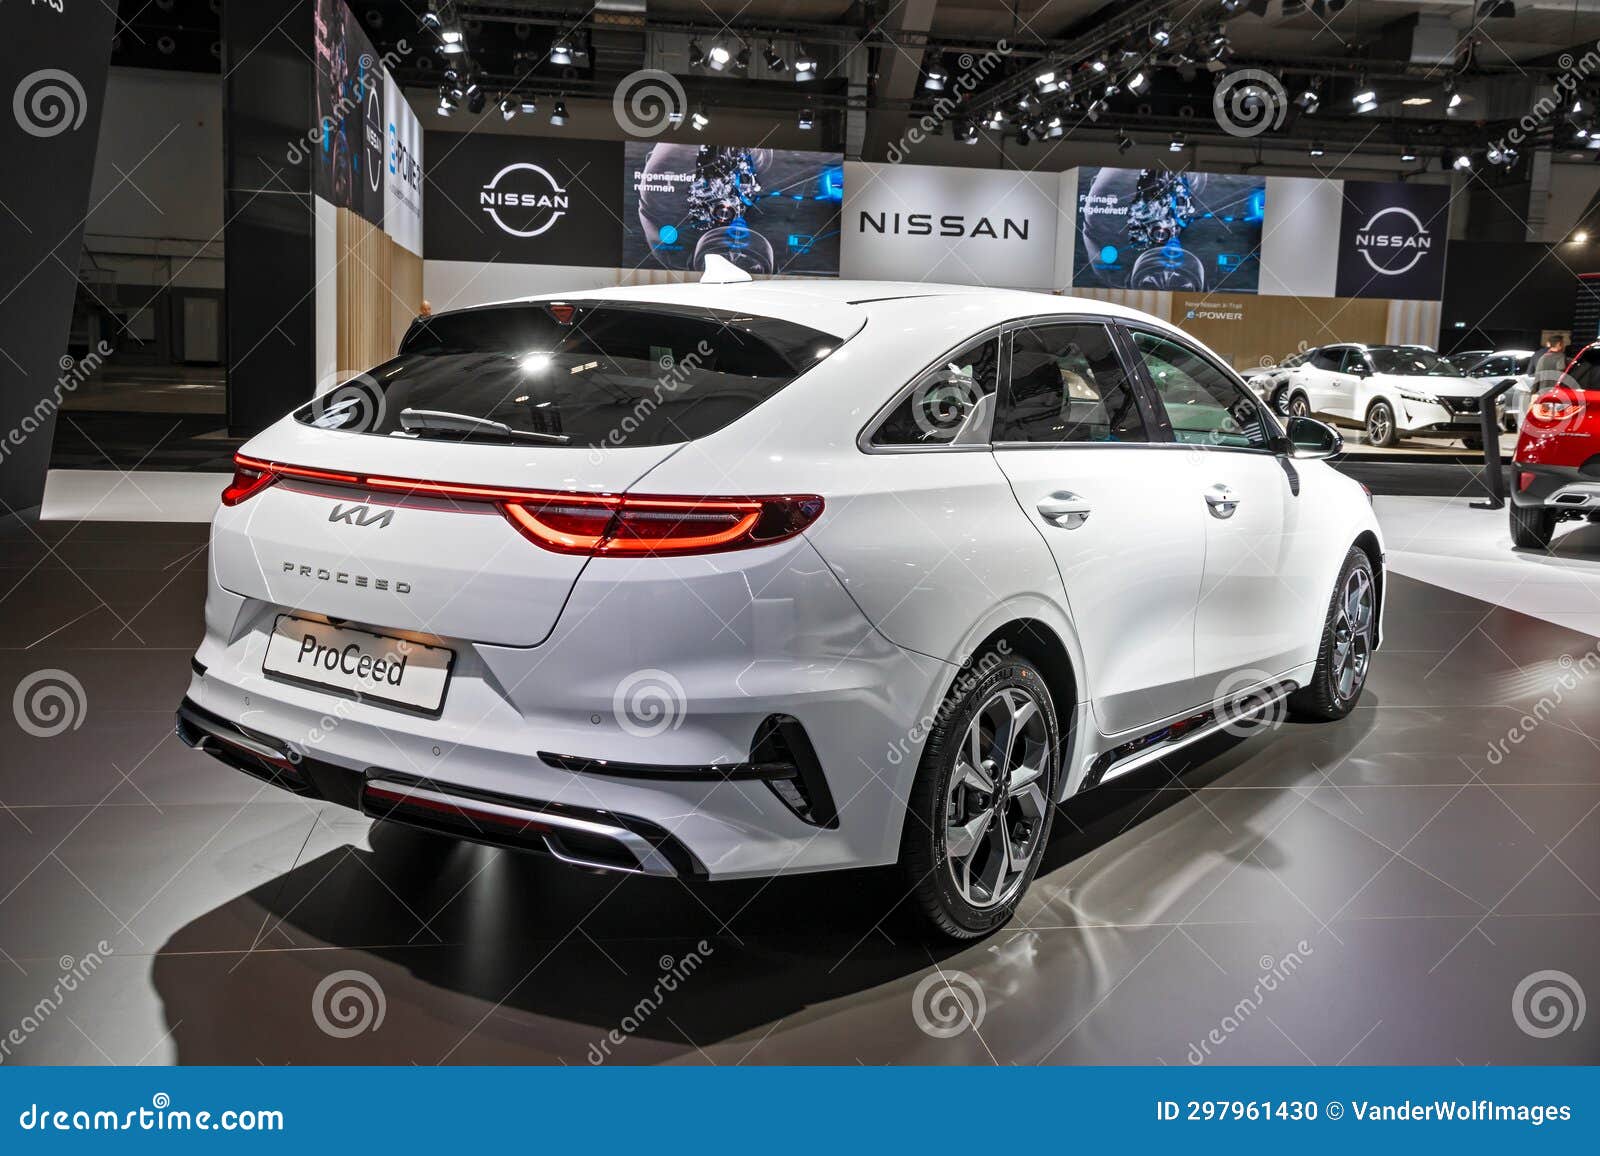 Kia ProCeed GT Car Showcased at the Brussels Autosalon European Motor Show.  Brussels, Belgium - January 13, 2023 Editorial Image - Image of 2023, auto:  297961430